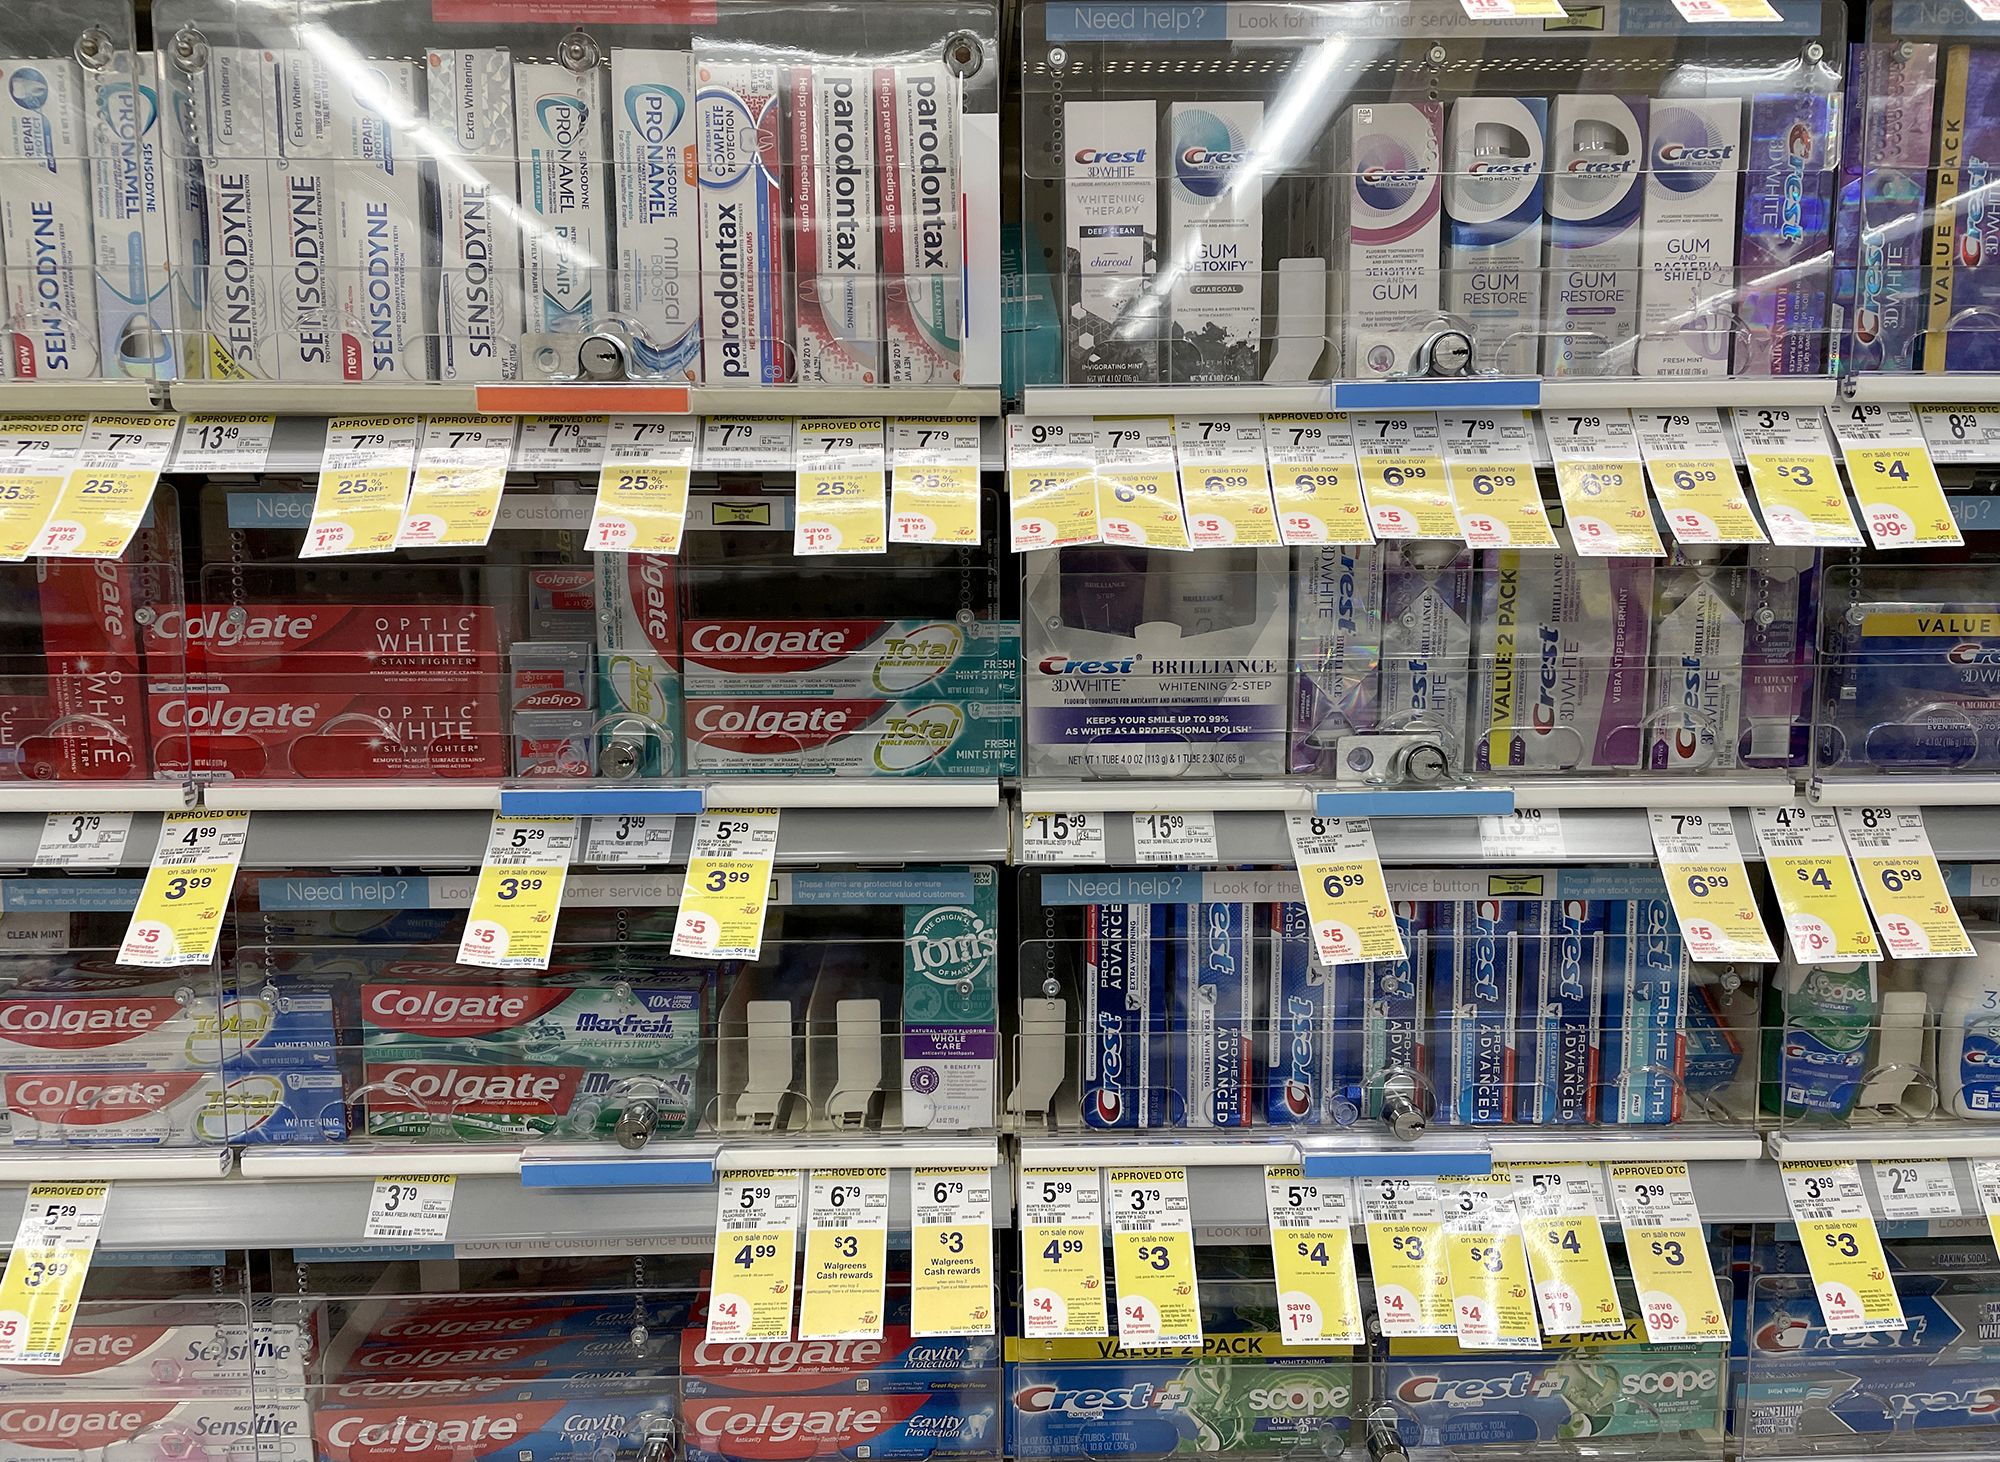 Why drug stores lock up their products behind plastic cases | CNN Business